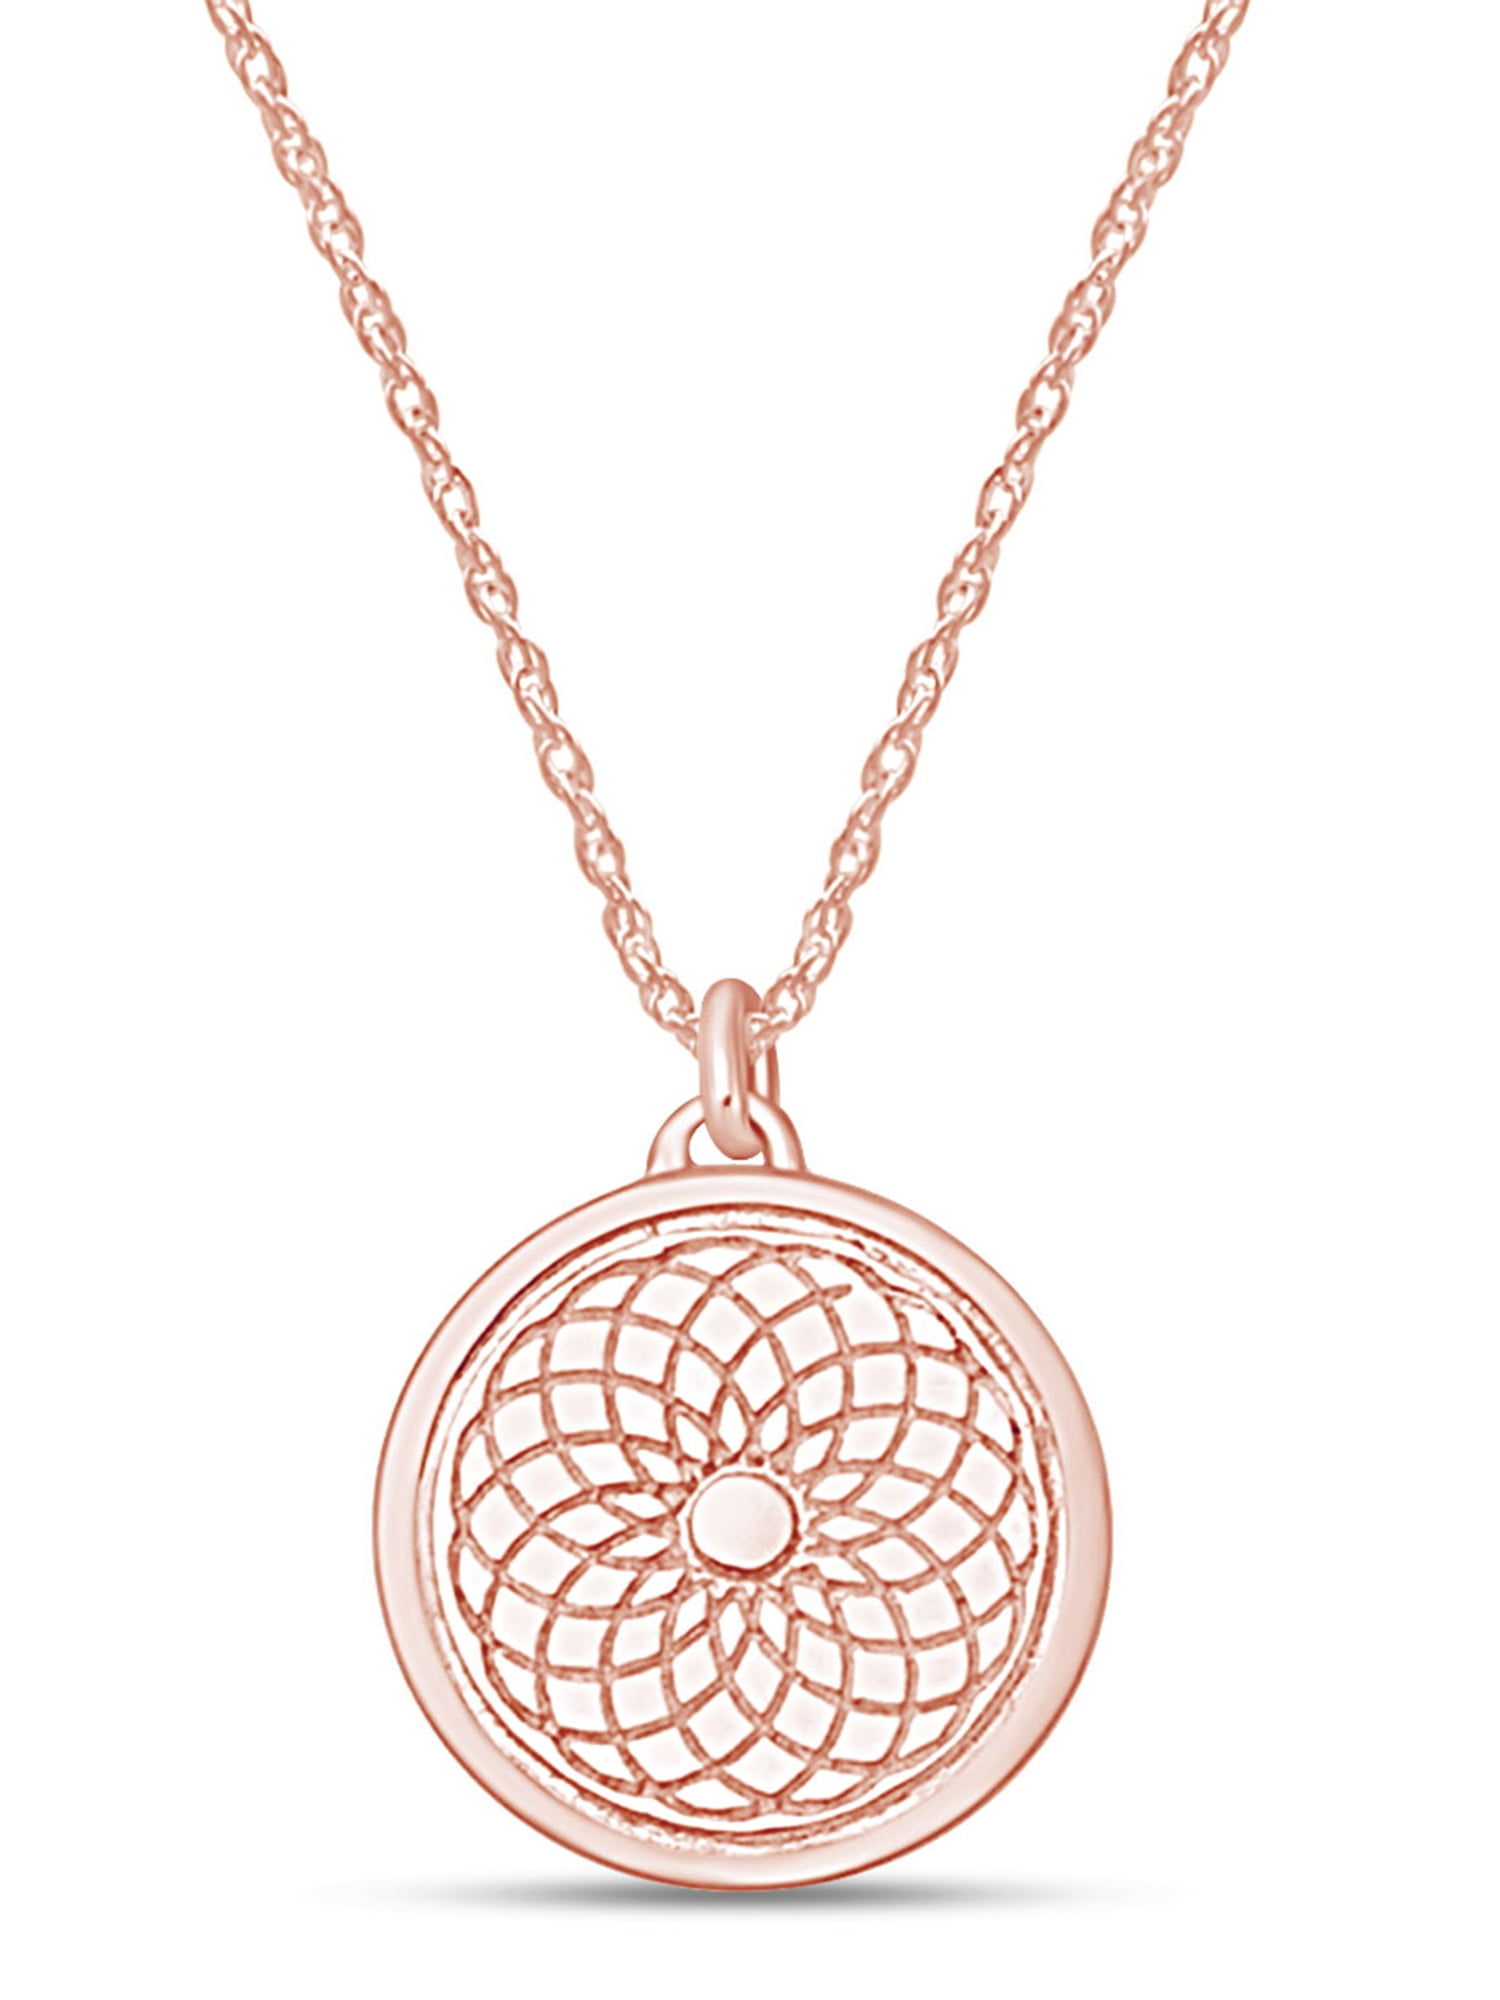 AFFY Personalize Engravable Double Circle Pendant Necklace in 14k Gold Over Sterling Silver